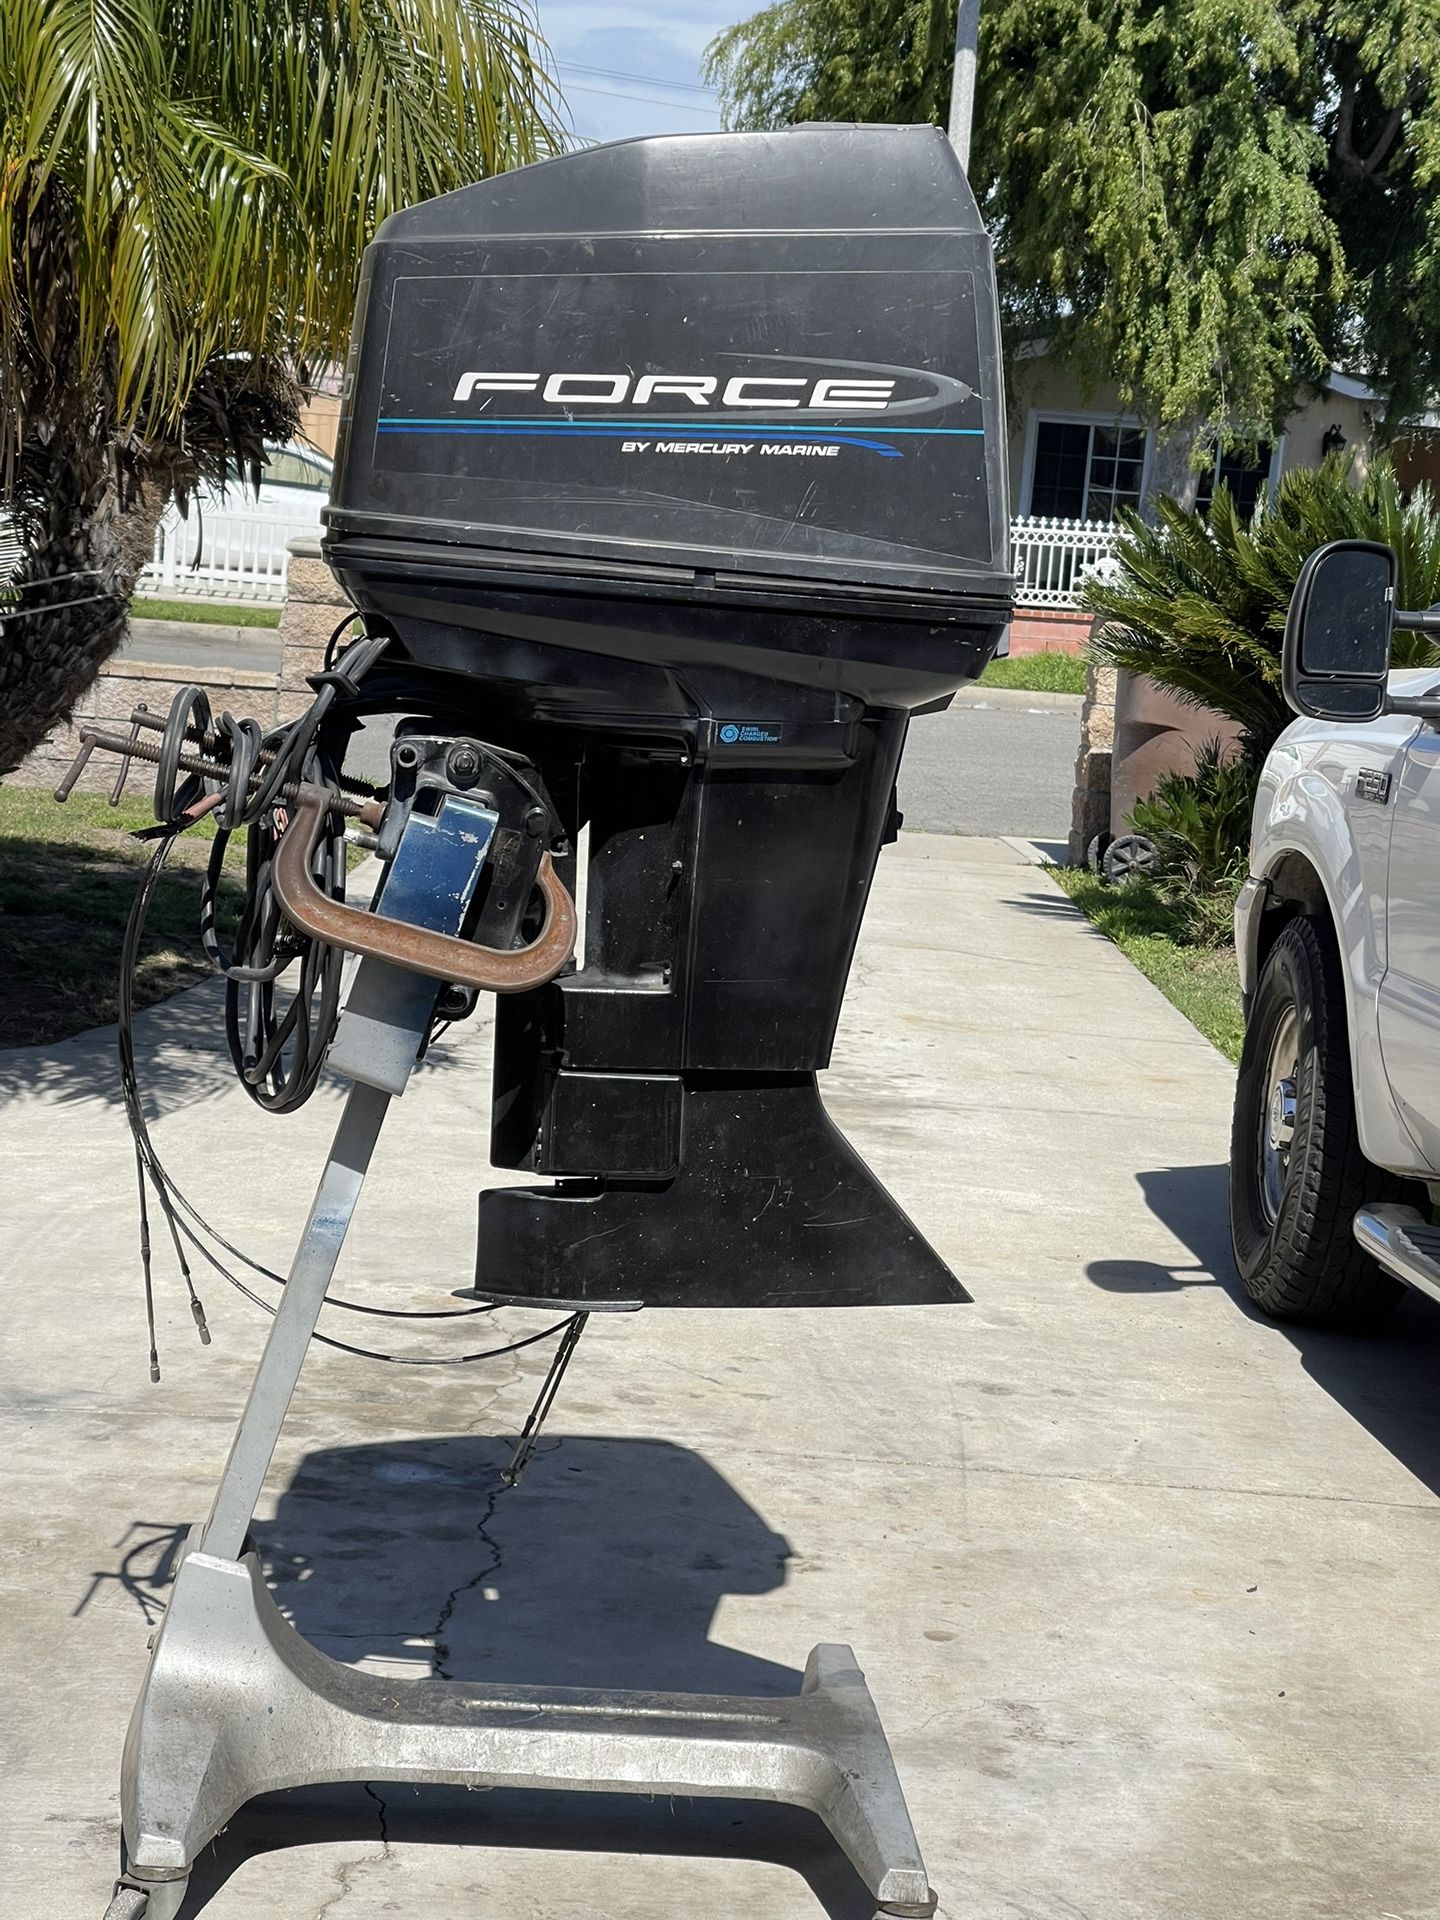 Force Mercury 125, Hp Outboard Motor with Stand